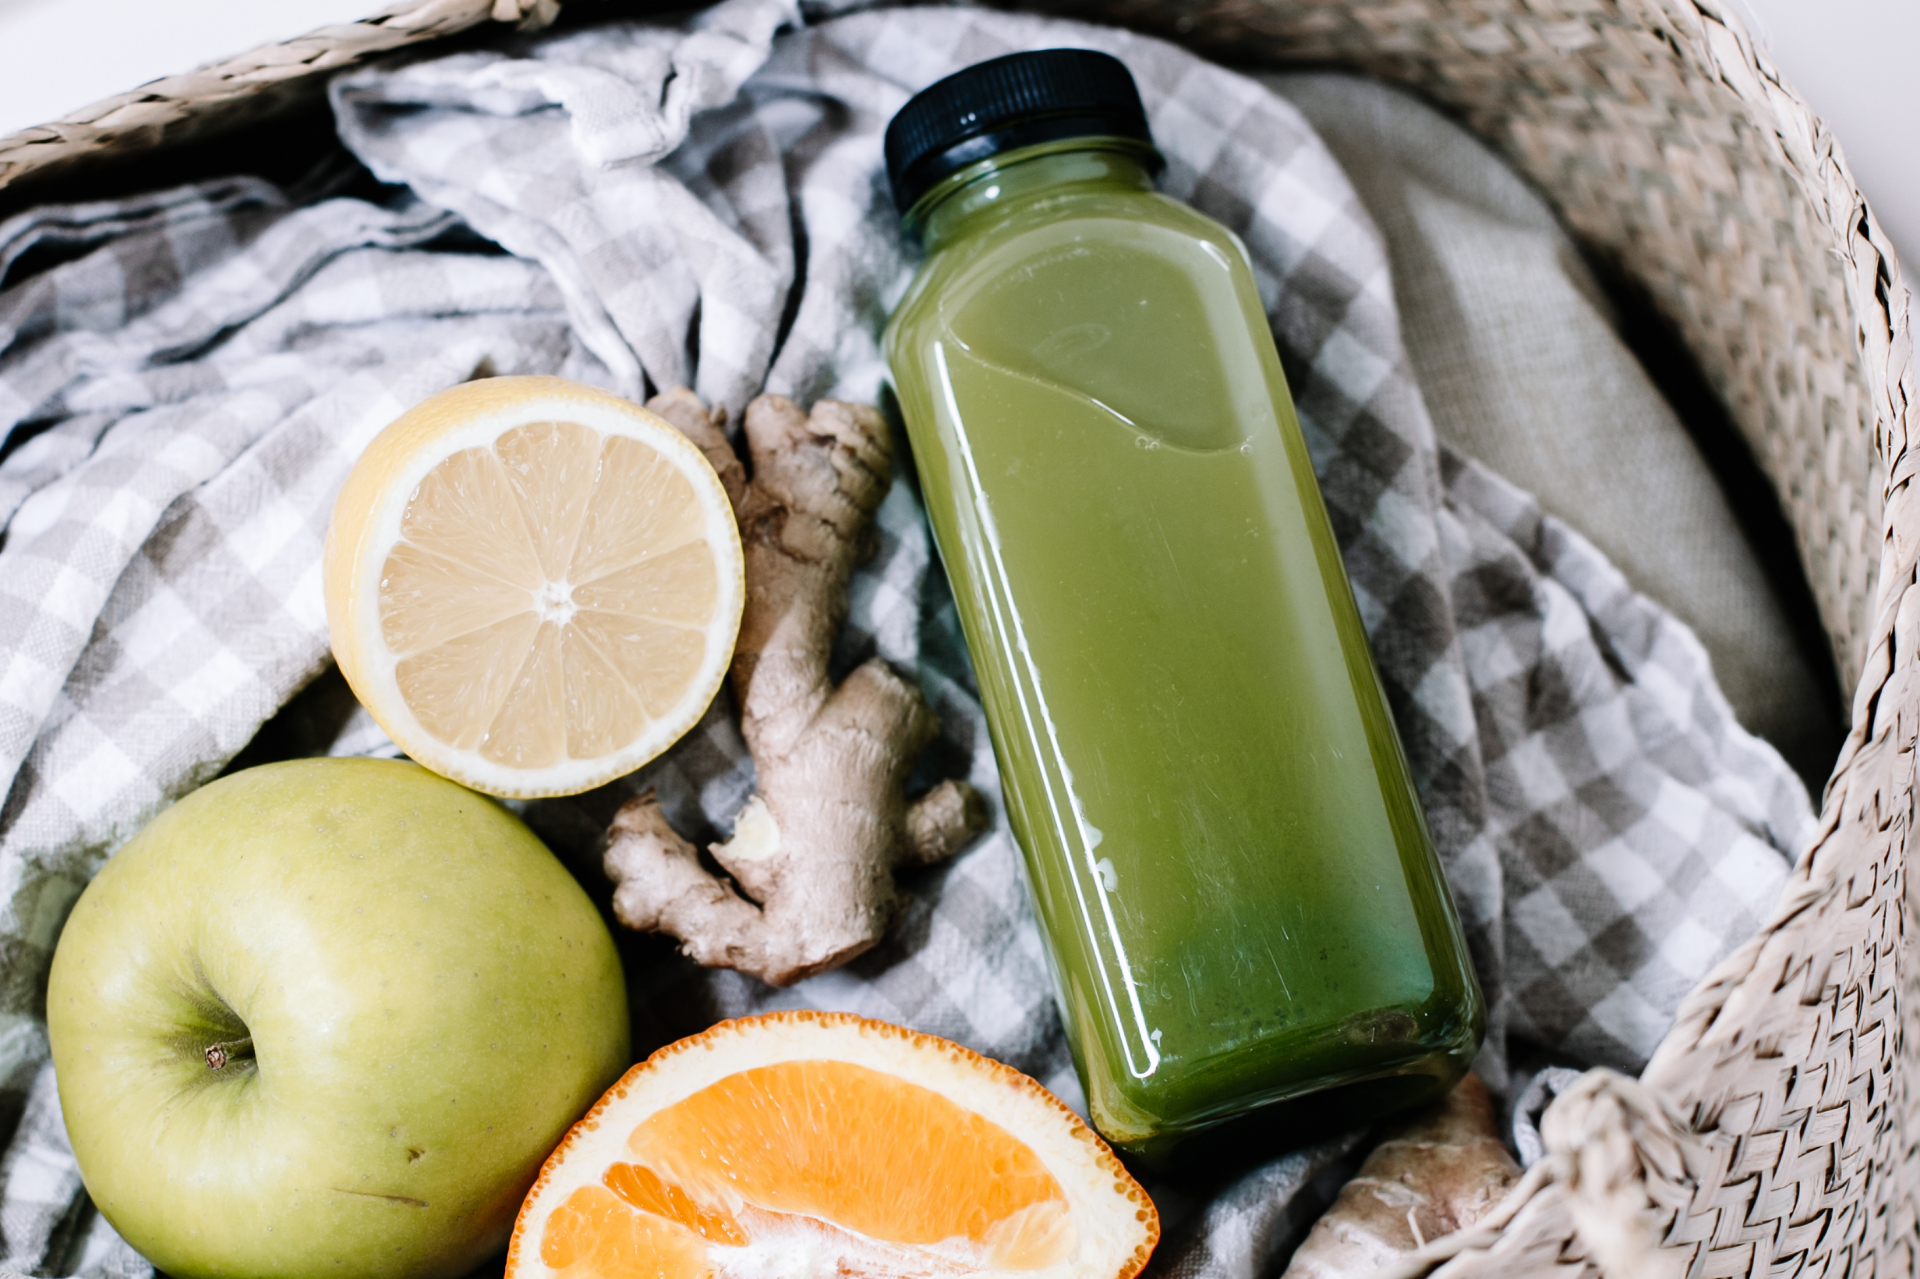 How to detox naturally